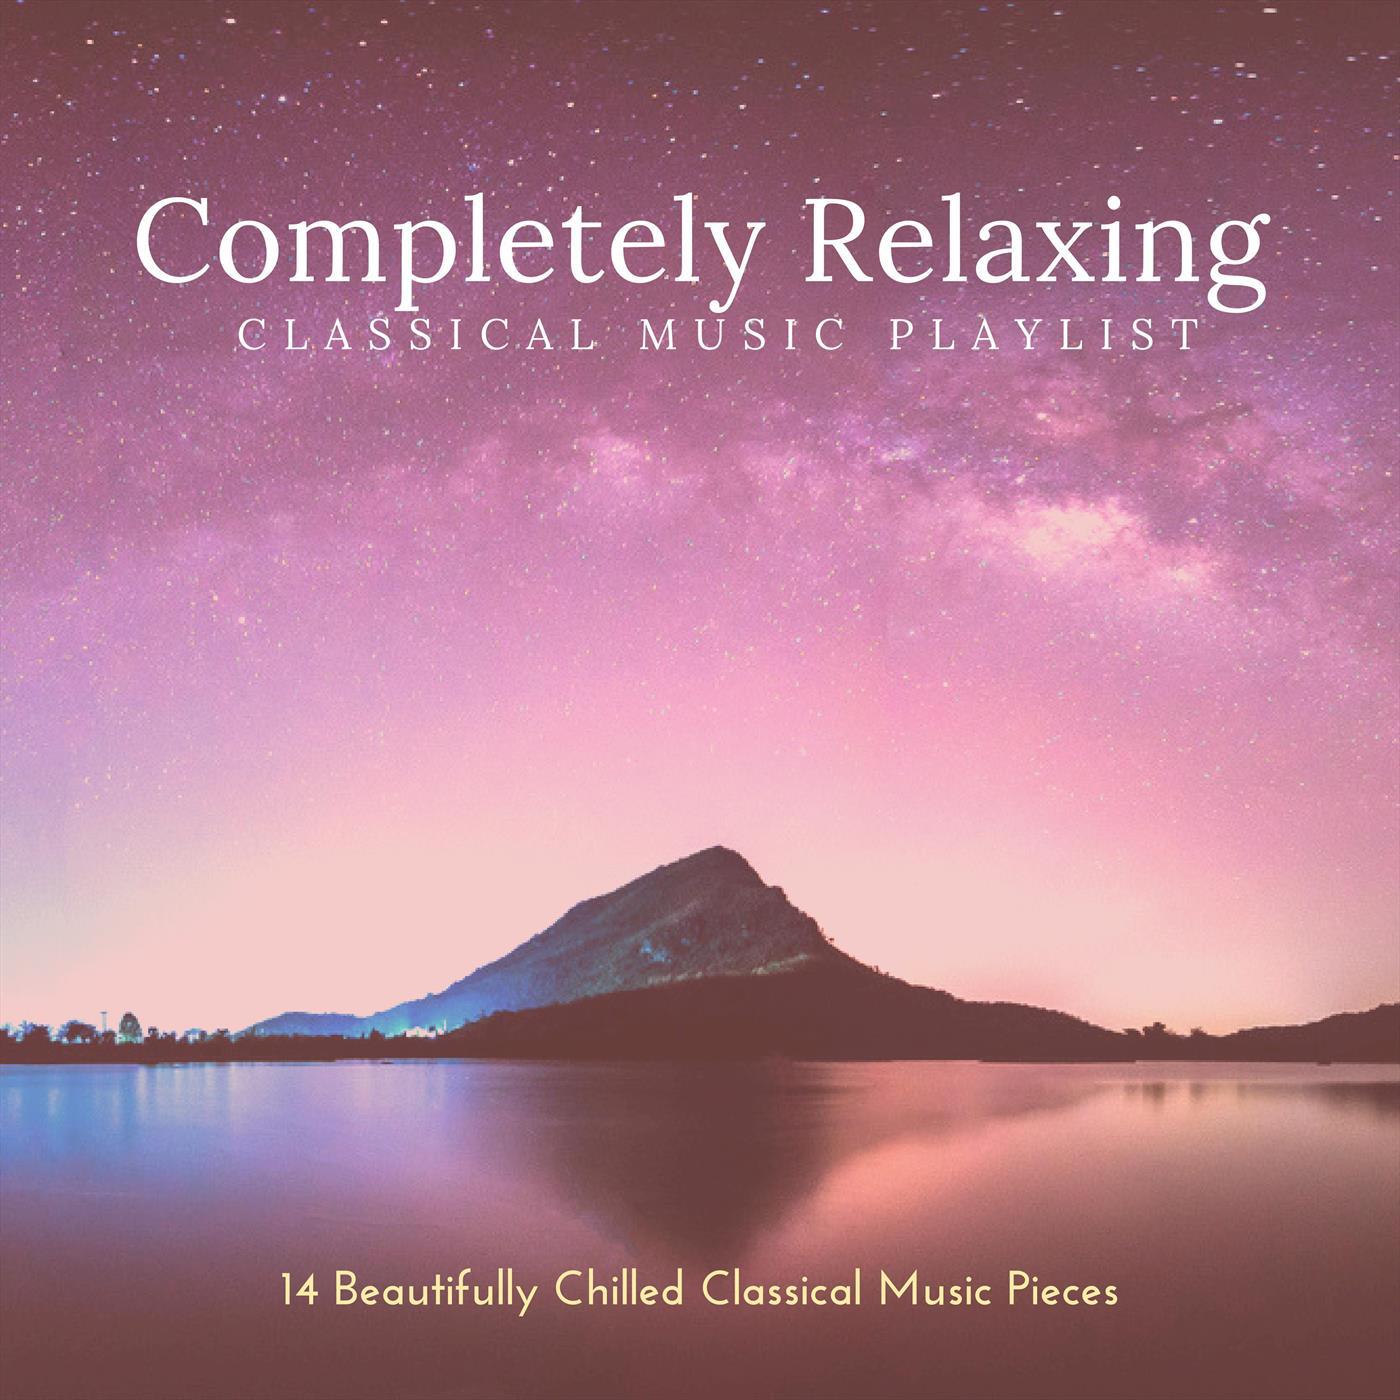 Completely Relaxing Classical Music Playlist: 14 Beautifully Chilled Classical Pieces